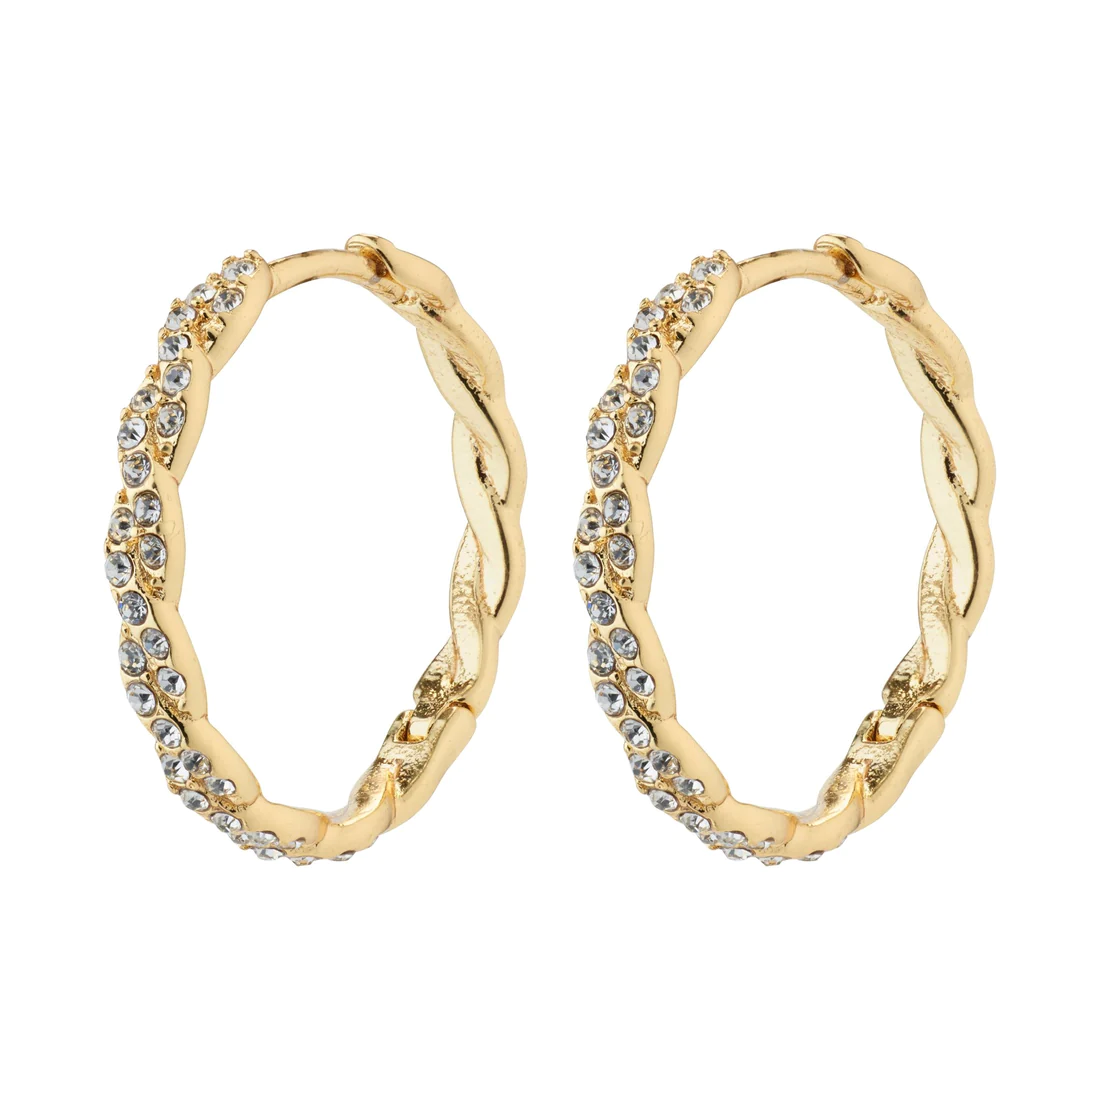 Pilgrim Ezo Twirled Crystal Hoops - Gold Accessories - Jewelry - Earrings by Pilgrim | Grace the Boutique